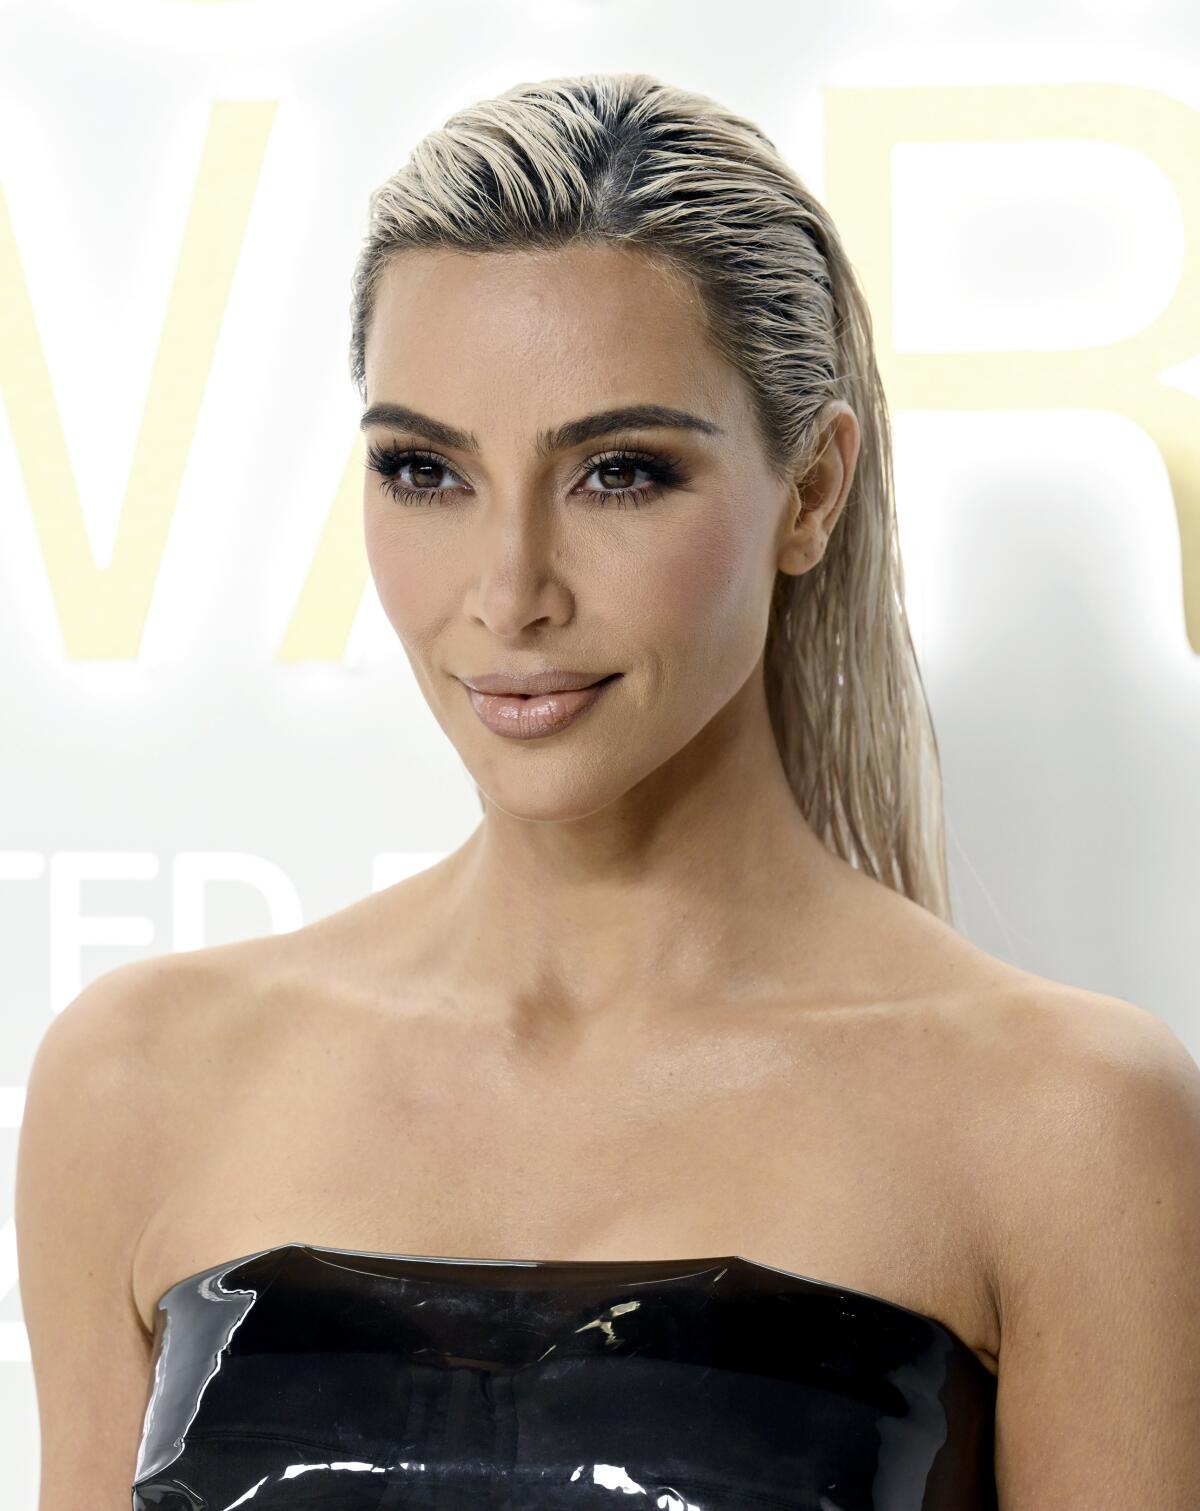 Kim Kardashian poses with slicked-back bleached hair in a black latex dress